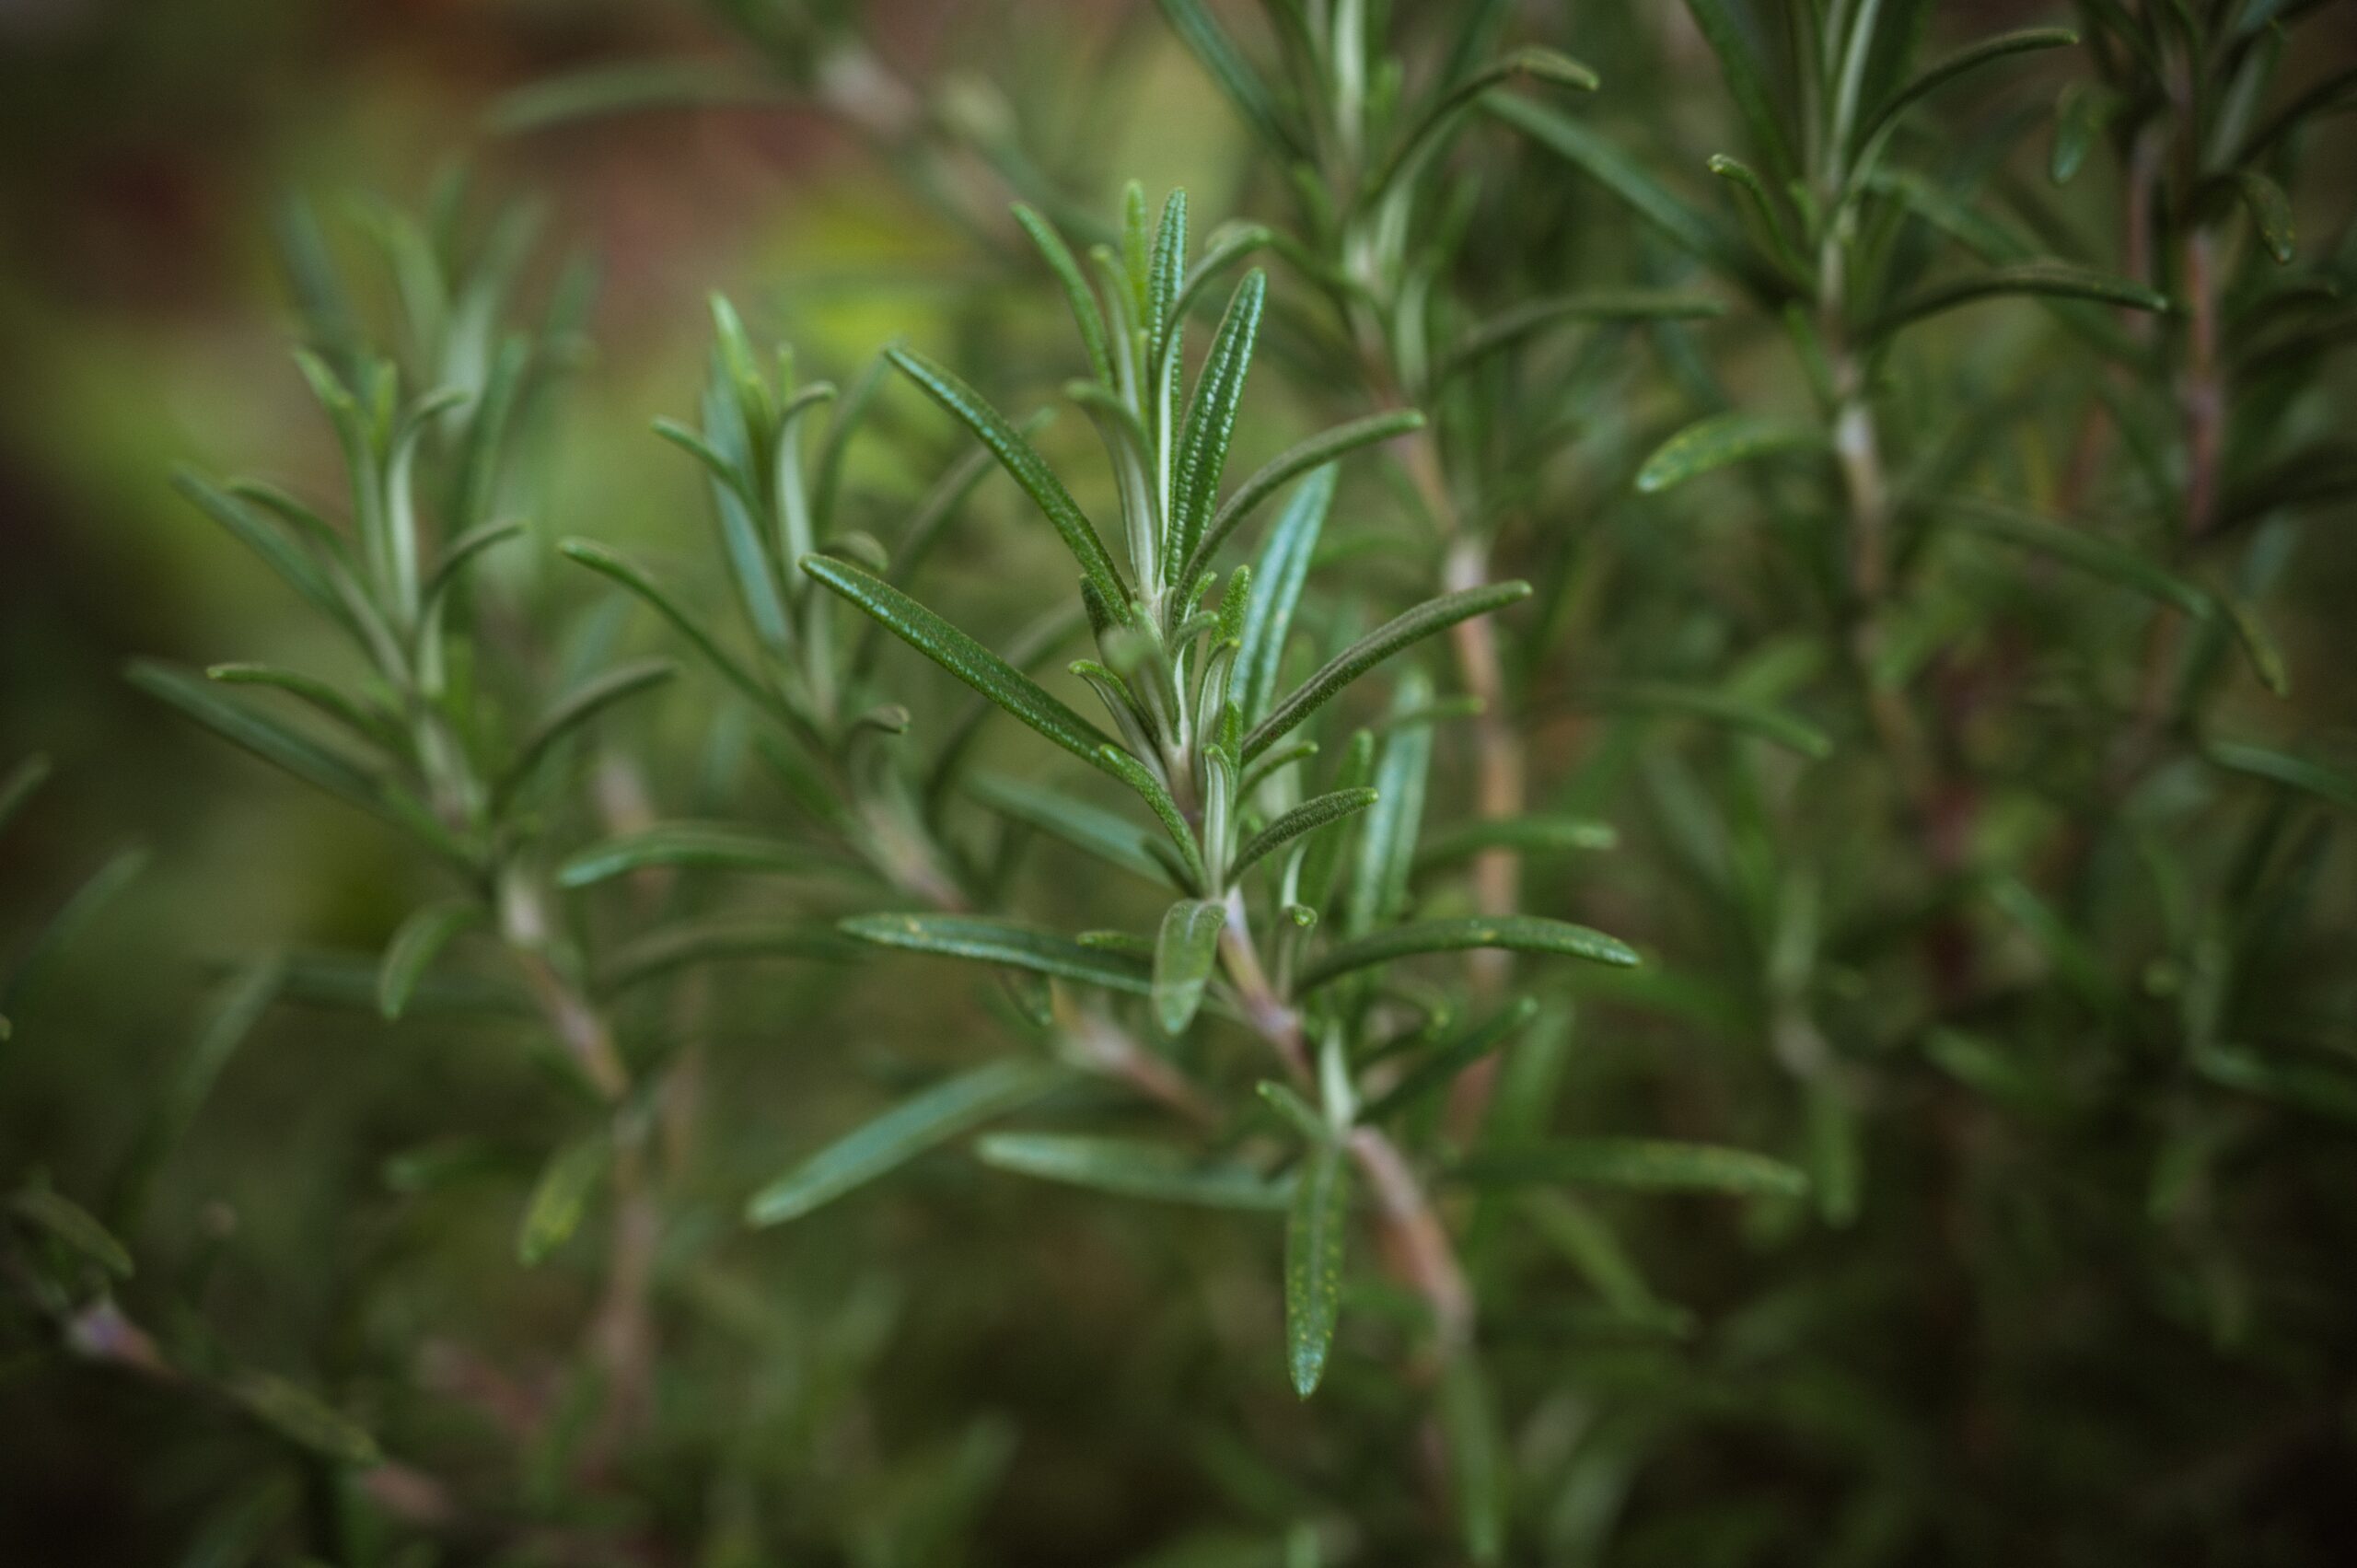 Great for steaks, soups, and other recipes, Rosemary is also a great plant that deters flies. Pictured: Rosemary.